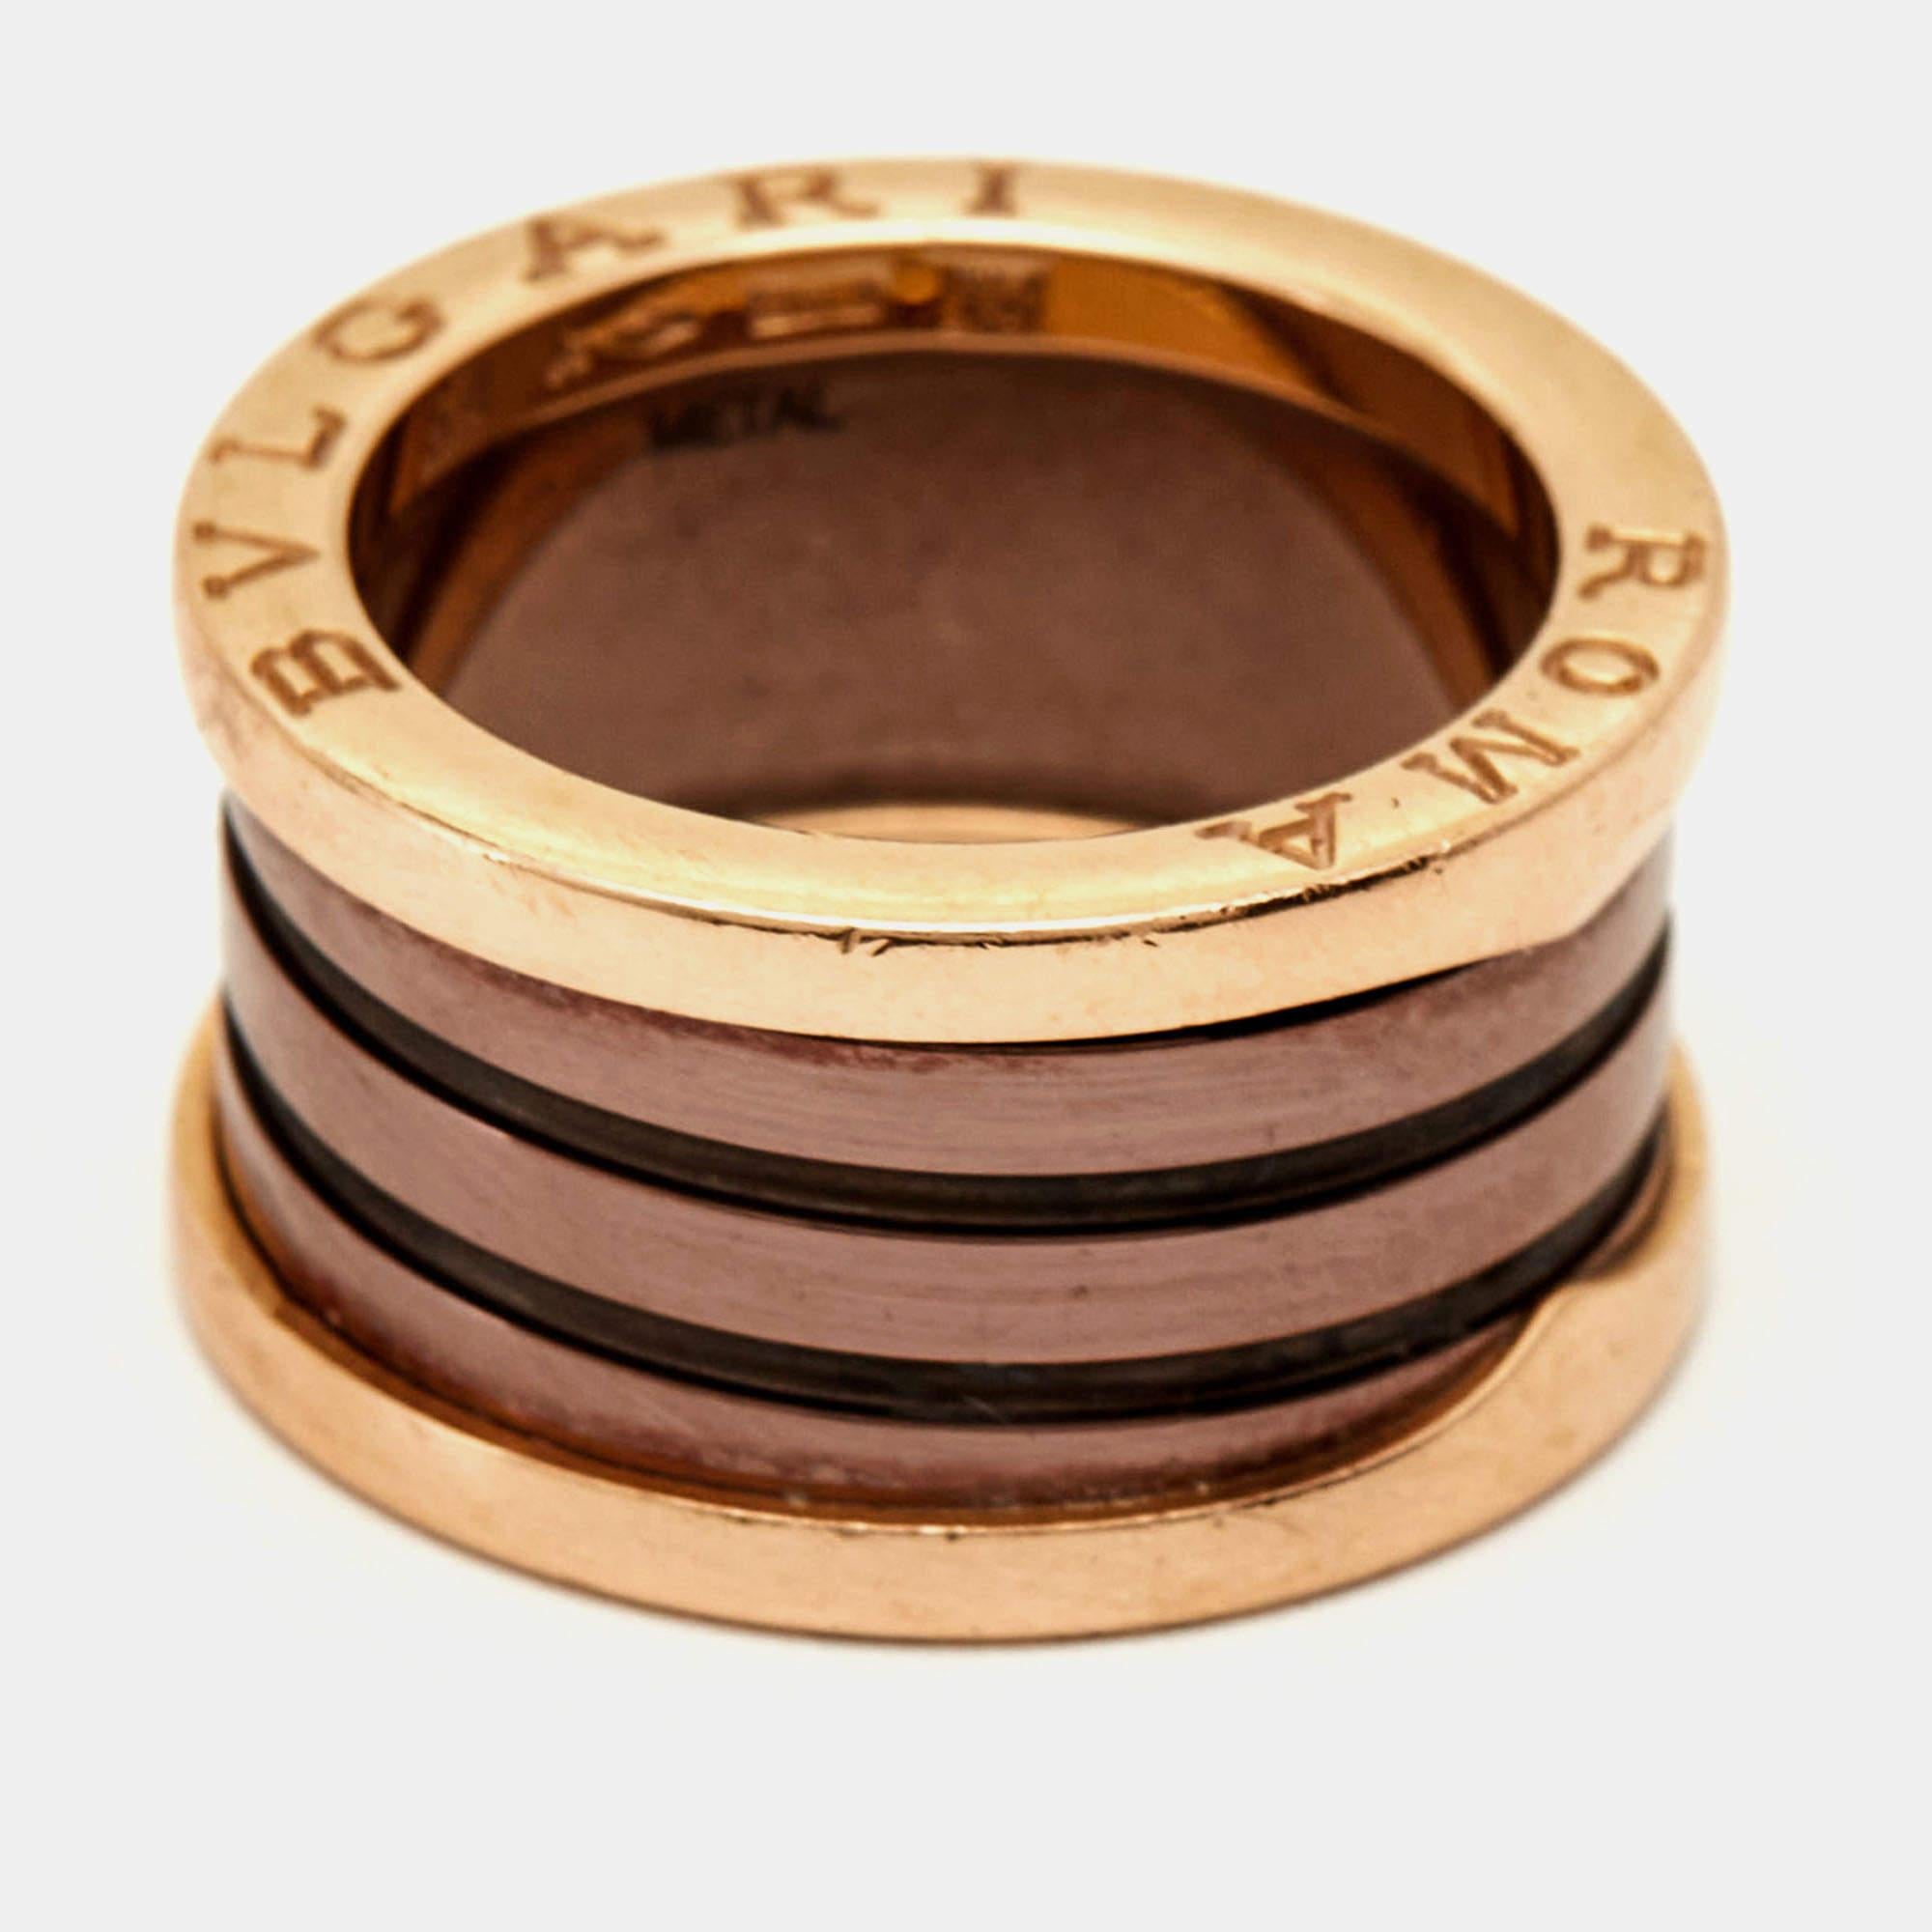 The Bvlgari B.Zero1 Roma ring is a luxurious and contemporary piece of jewelry. Crafted with precision, it features a sleek ceramic band adorned with the iconic B.Zero1 spiral motif in 18k rose gold, showcasing a perfect blend of modern design and